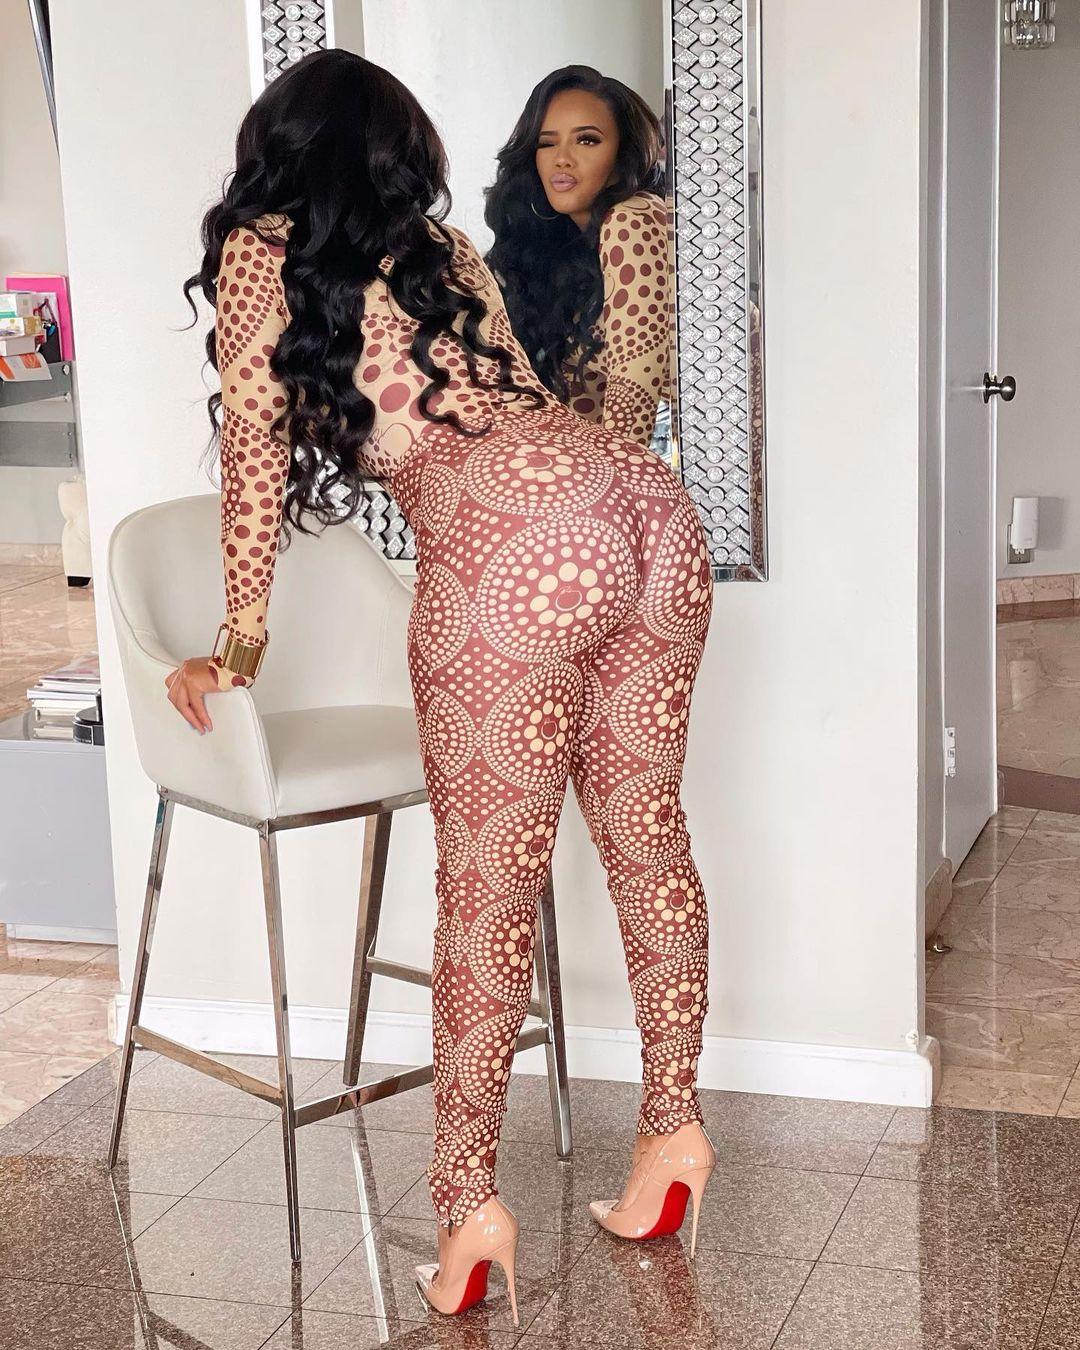 Angela Simmons in a brown bodysuit.